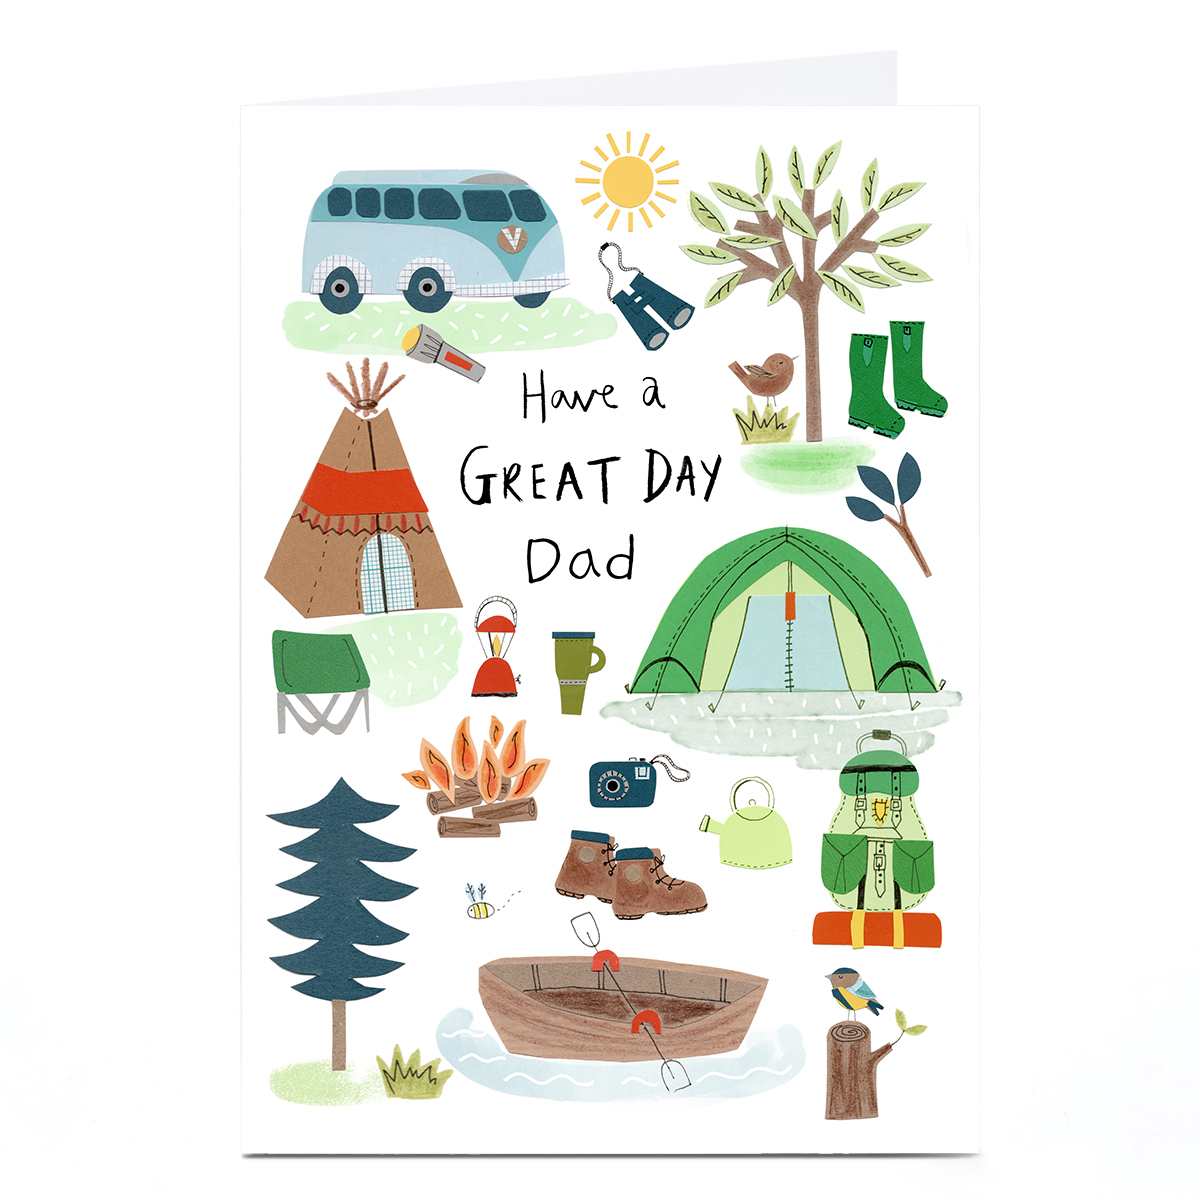 Personalised Lindsay Loves To Draw Father's Day Card - Have A Great Day